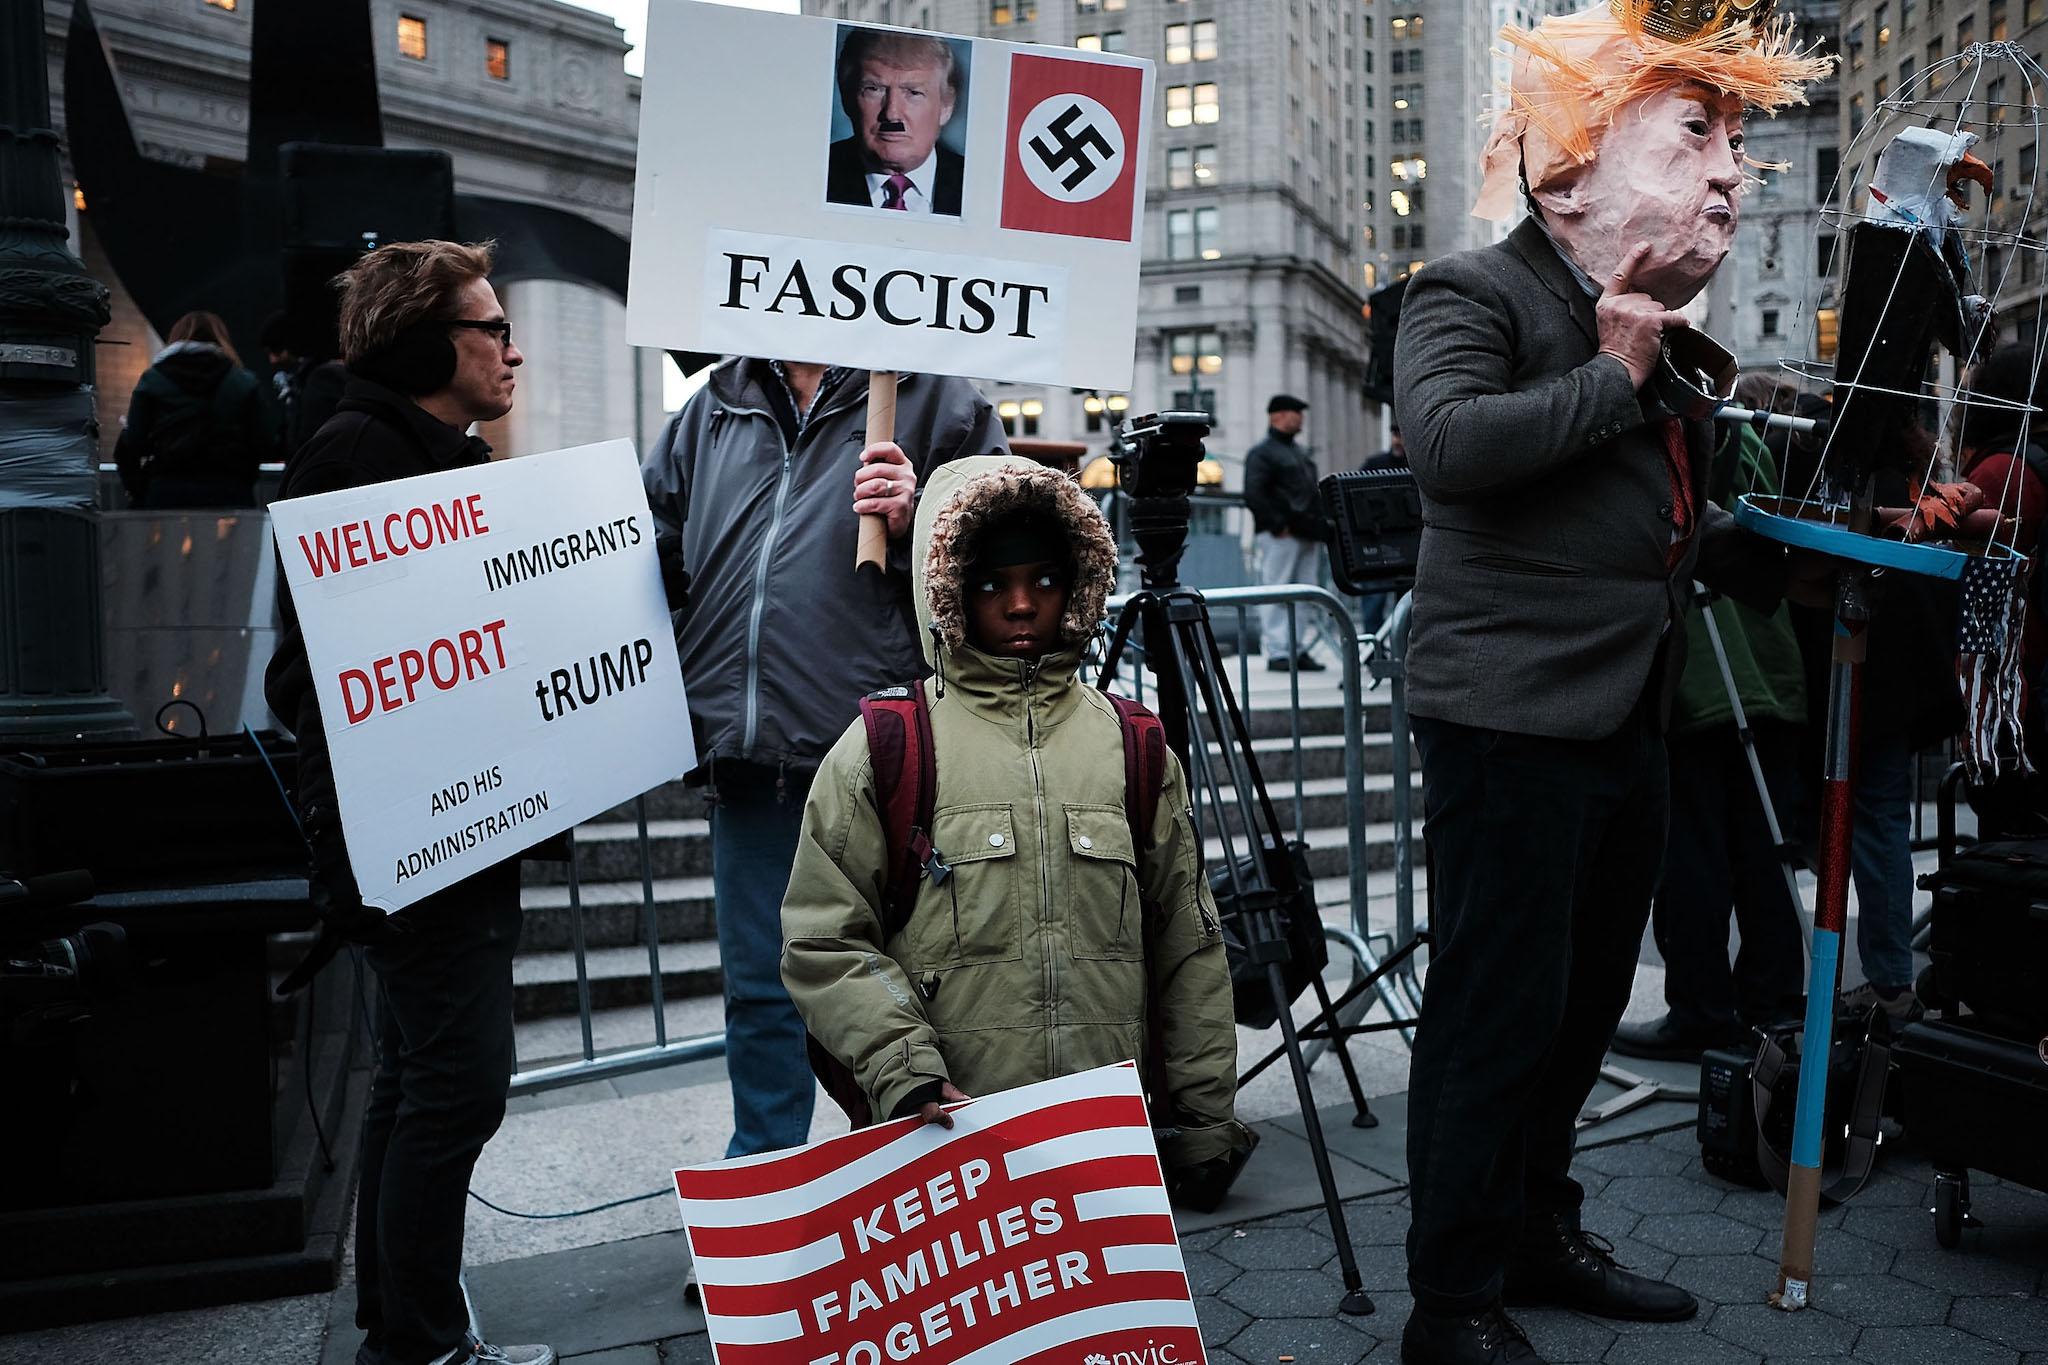 People continue to protest in lower Manhattan against the polices of President Donald Trump on February 1, 2017 in New York City